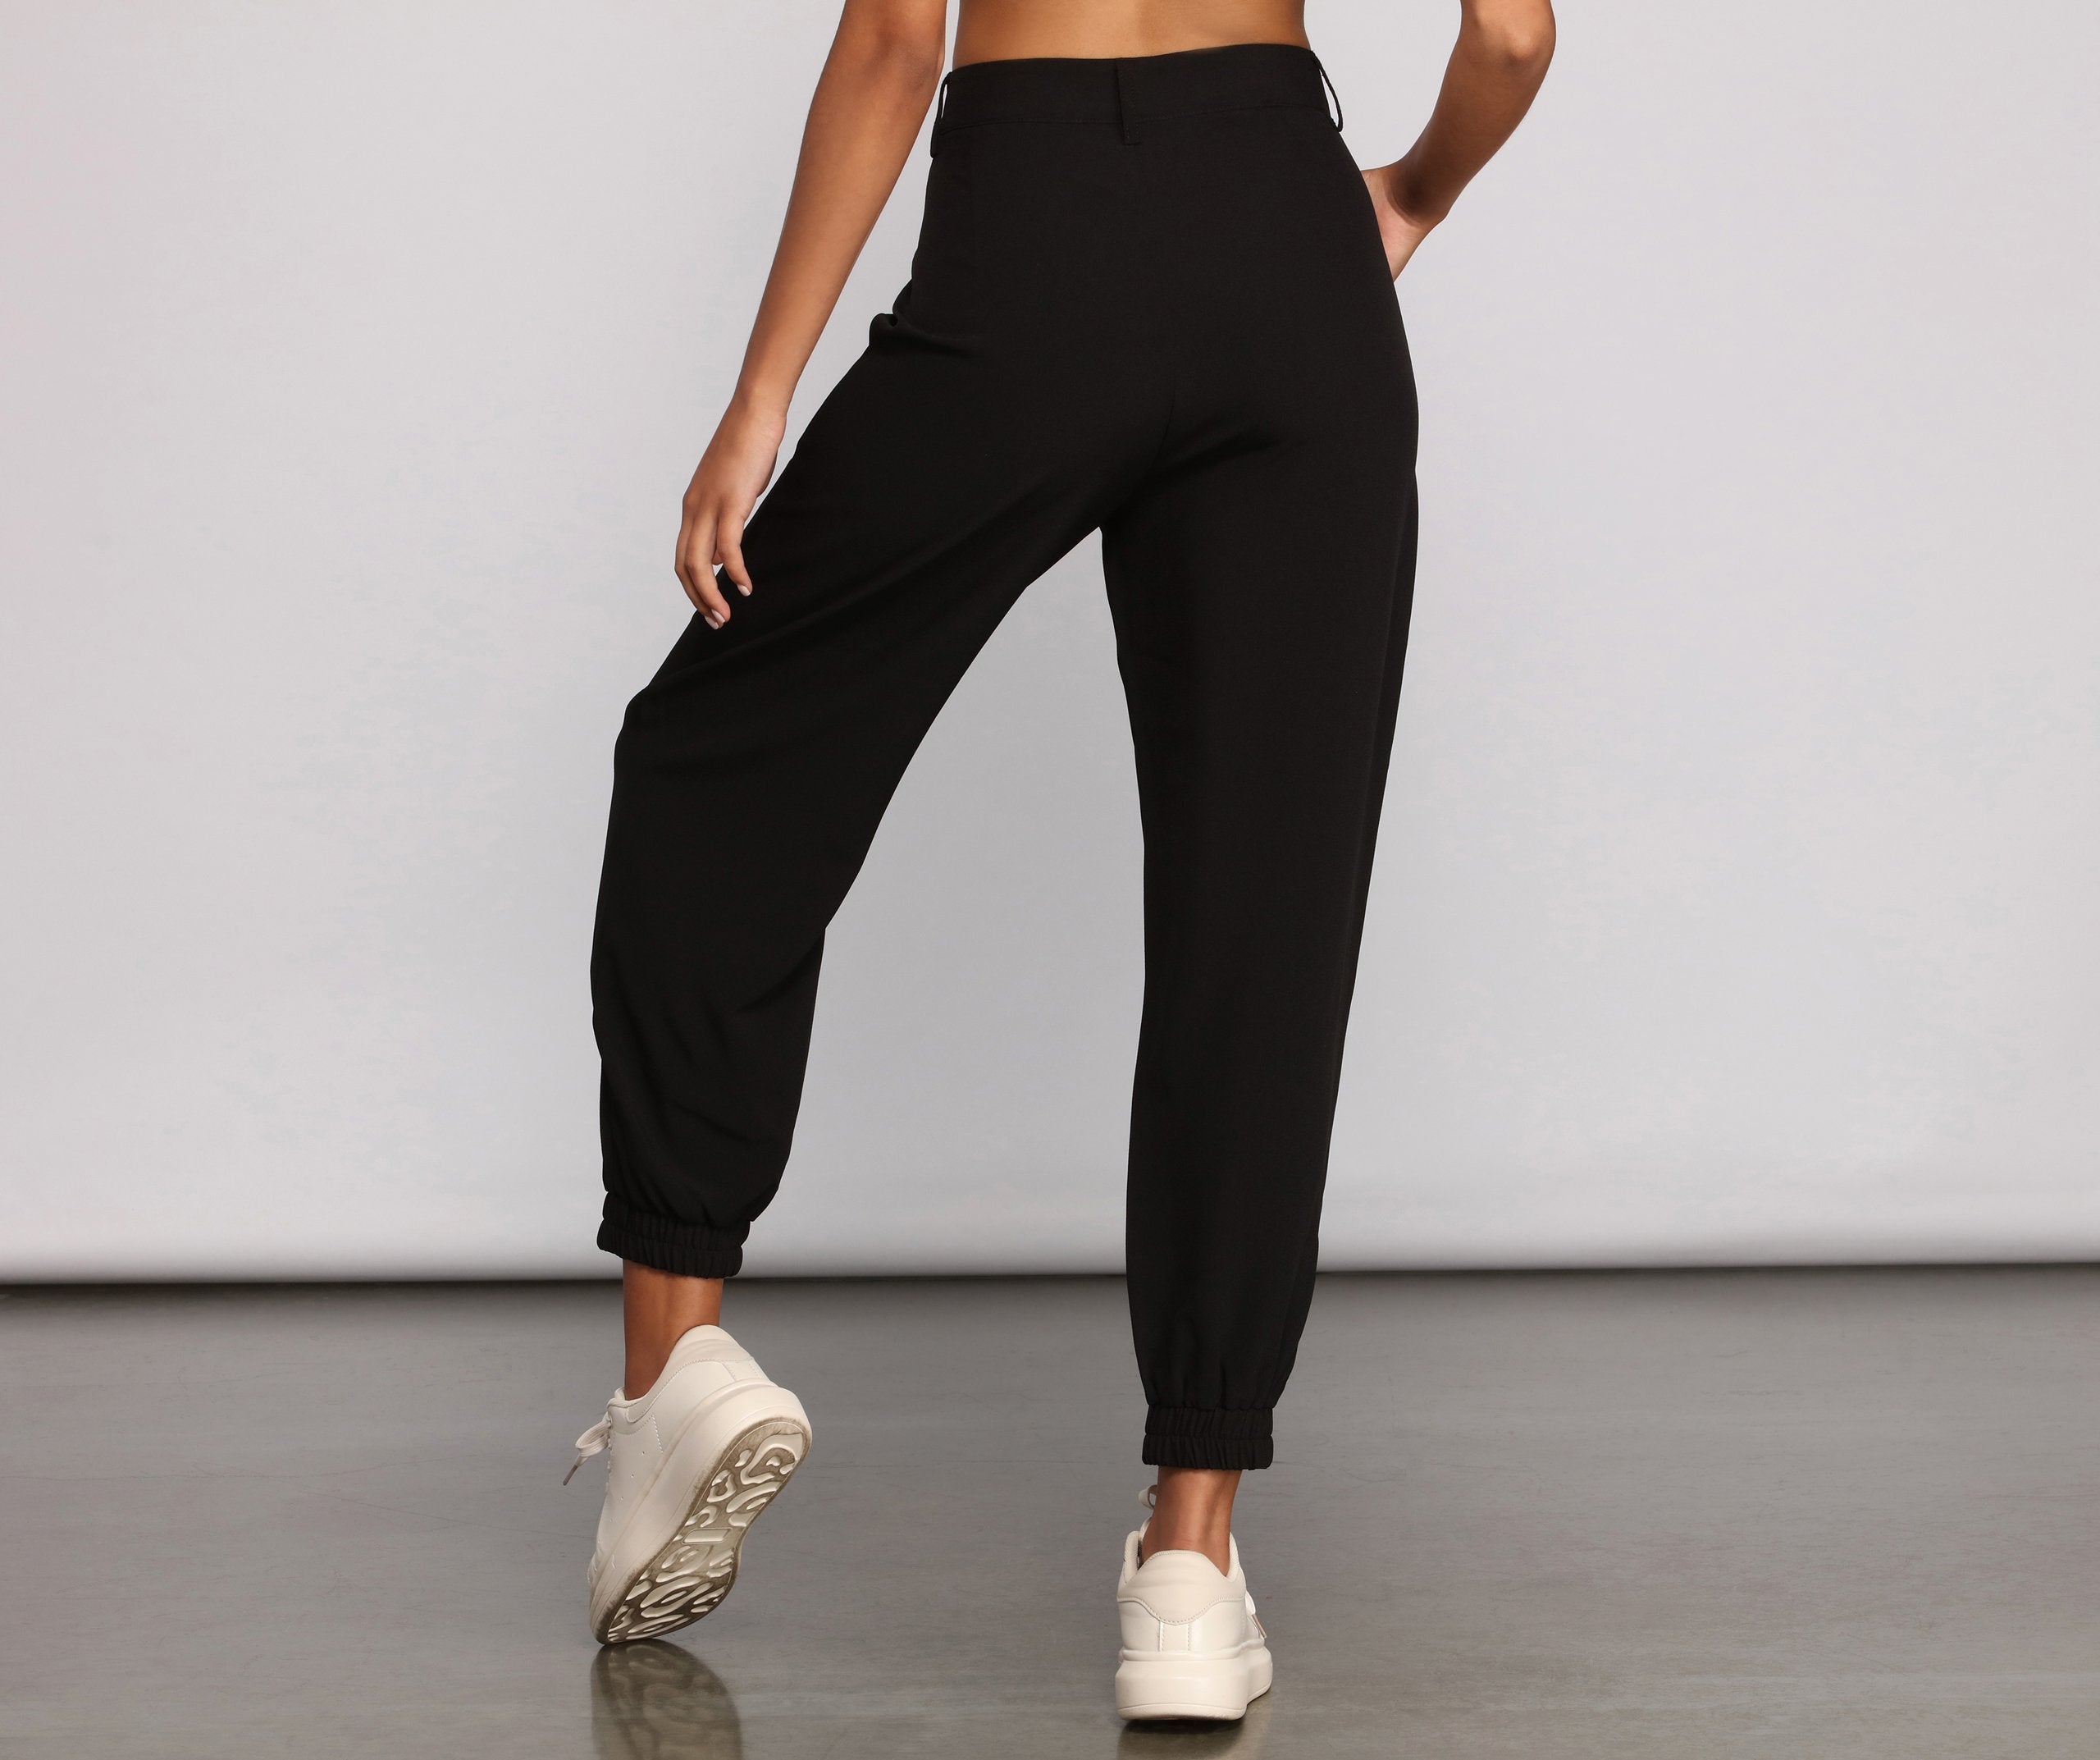 Casual-Chic Trouser Joggers - Lady Occasions